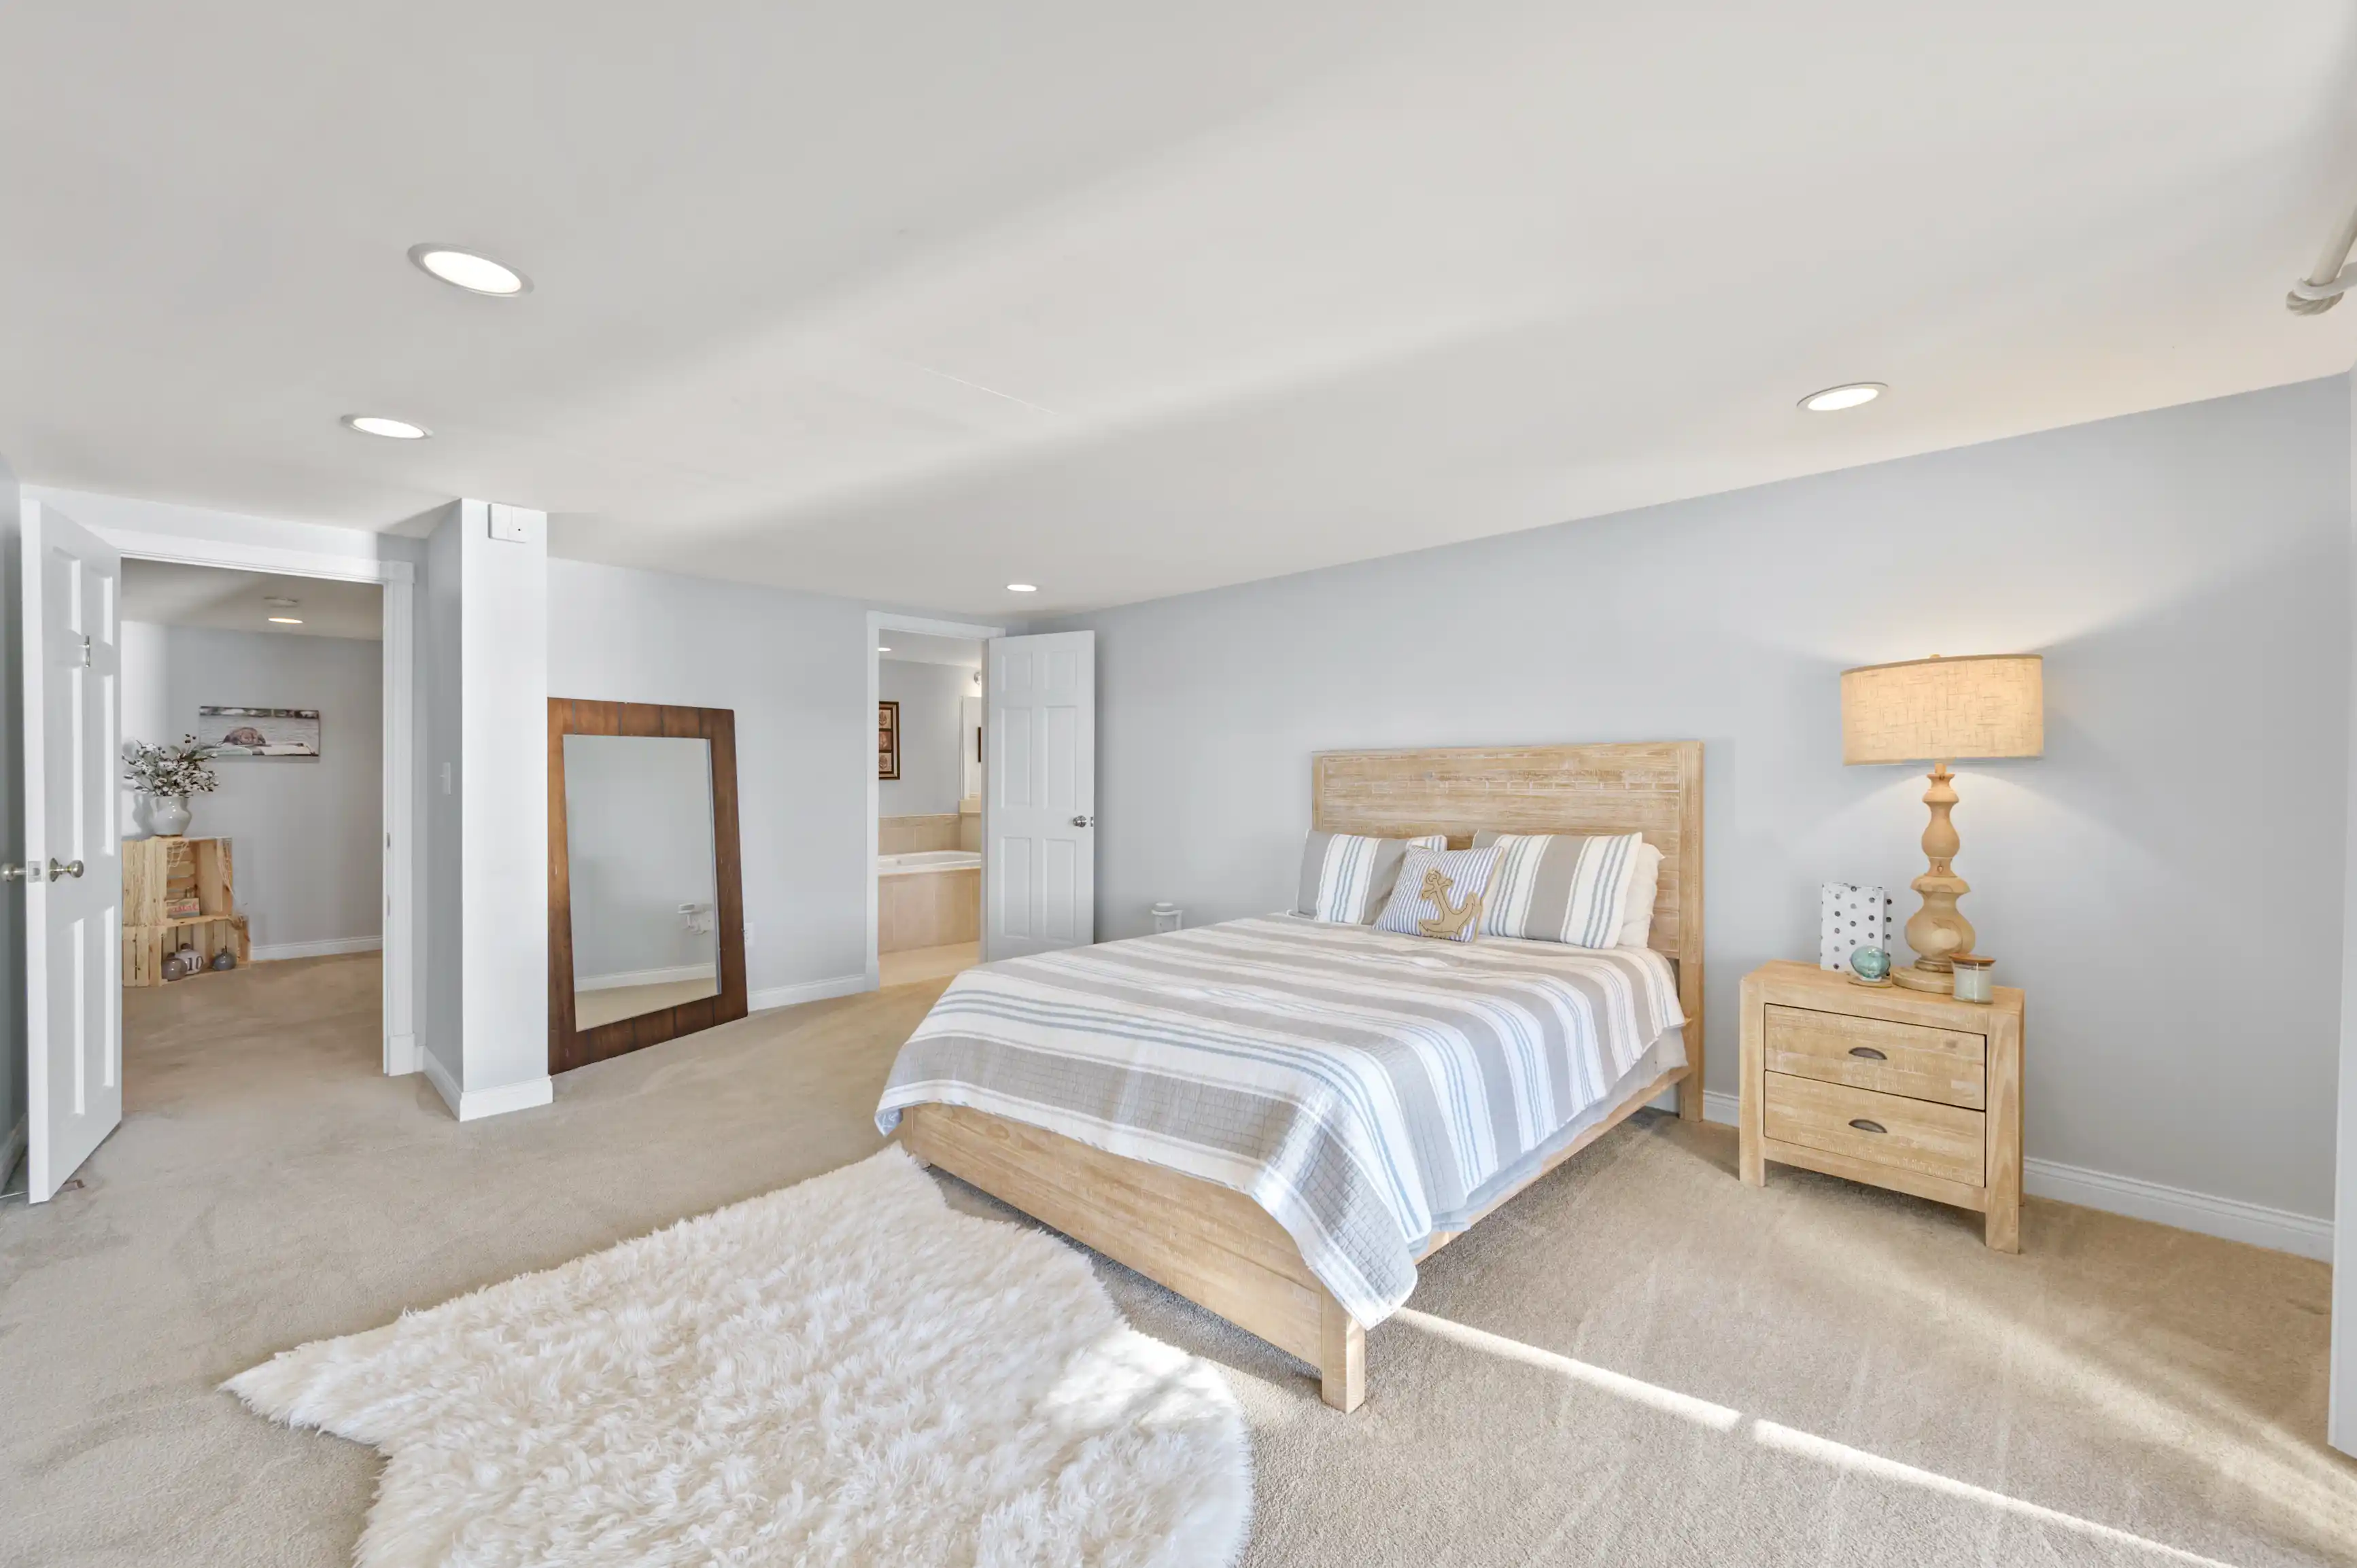 A bright, modern bedroom with a wooden bed and matching side table, striped bedding, a large floor mirror, a white fluffy area rug, and an en suite bathroom entrance visible in the background.